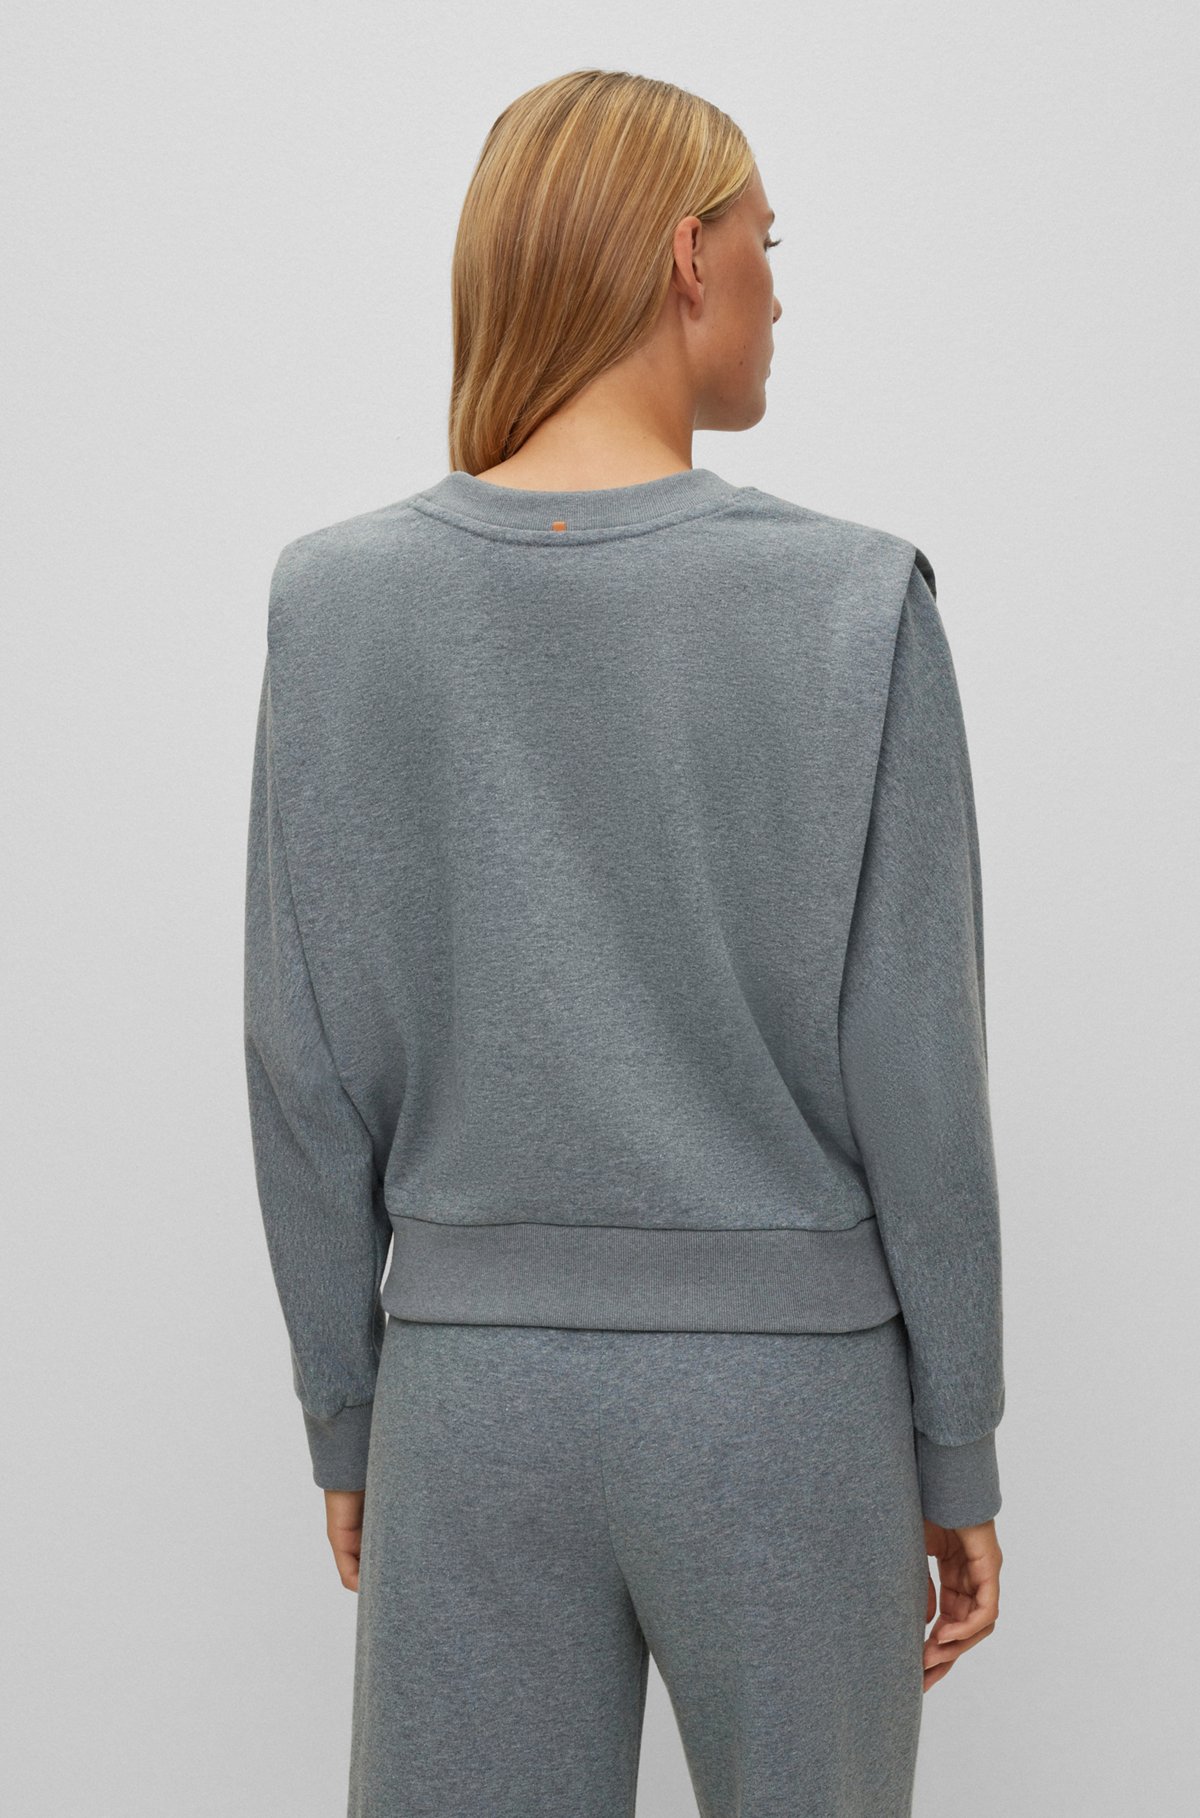 Relaxed-fit sweatshirt with layered shoulders and embellished logo, Grey